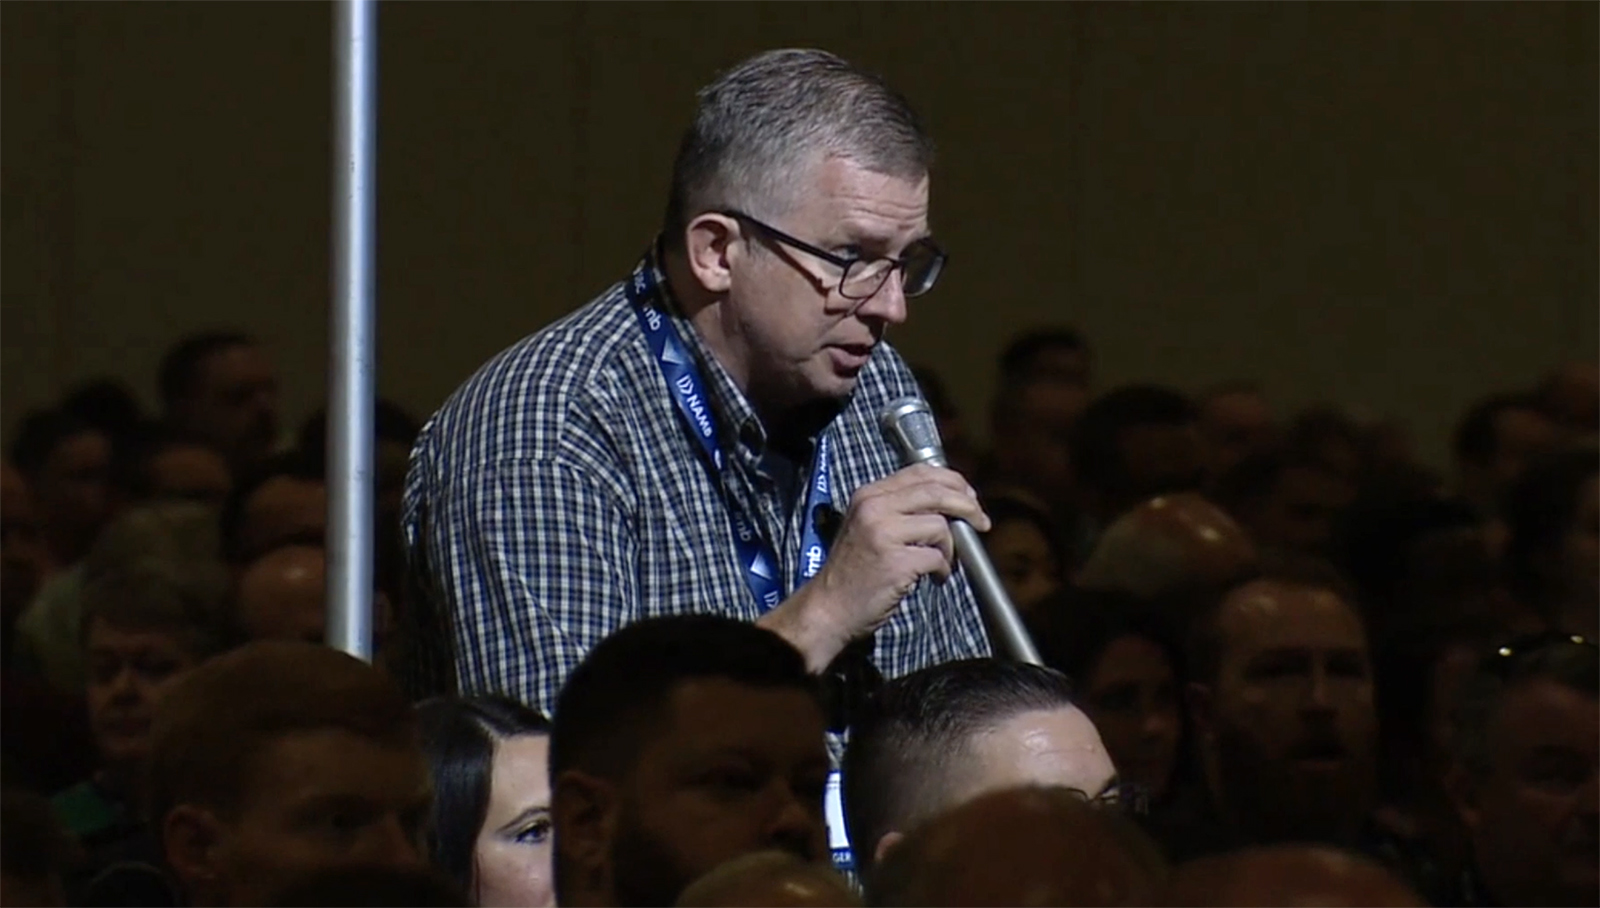 Pastor Todd Benkert speaks at the Southern Baptist Convention annual meeting in Nashville, Tennessee, in June 2022. Photo courtesy Todd Benkert